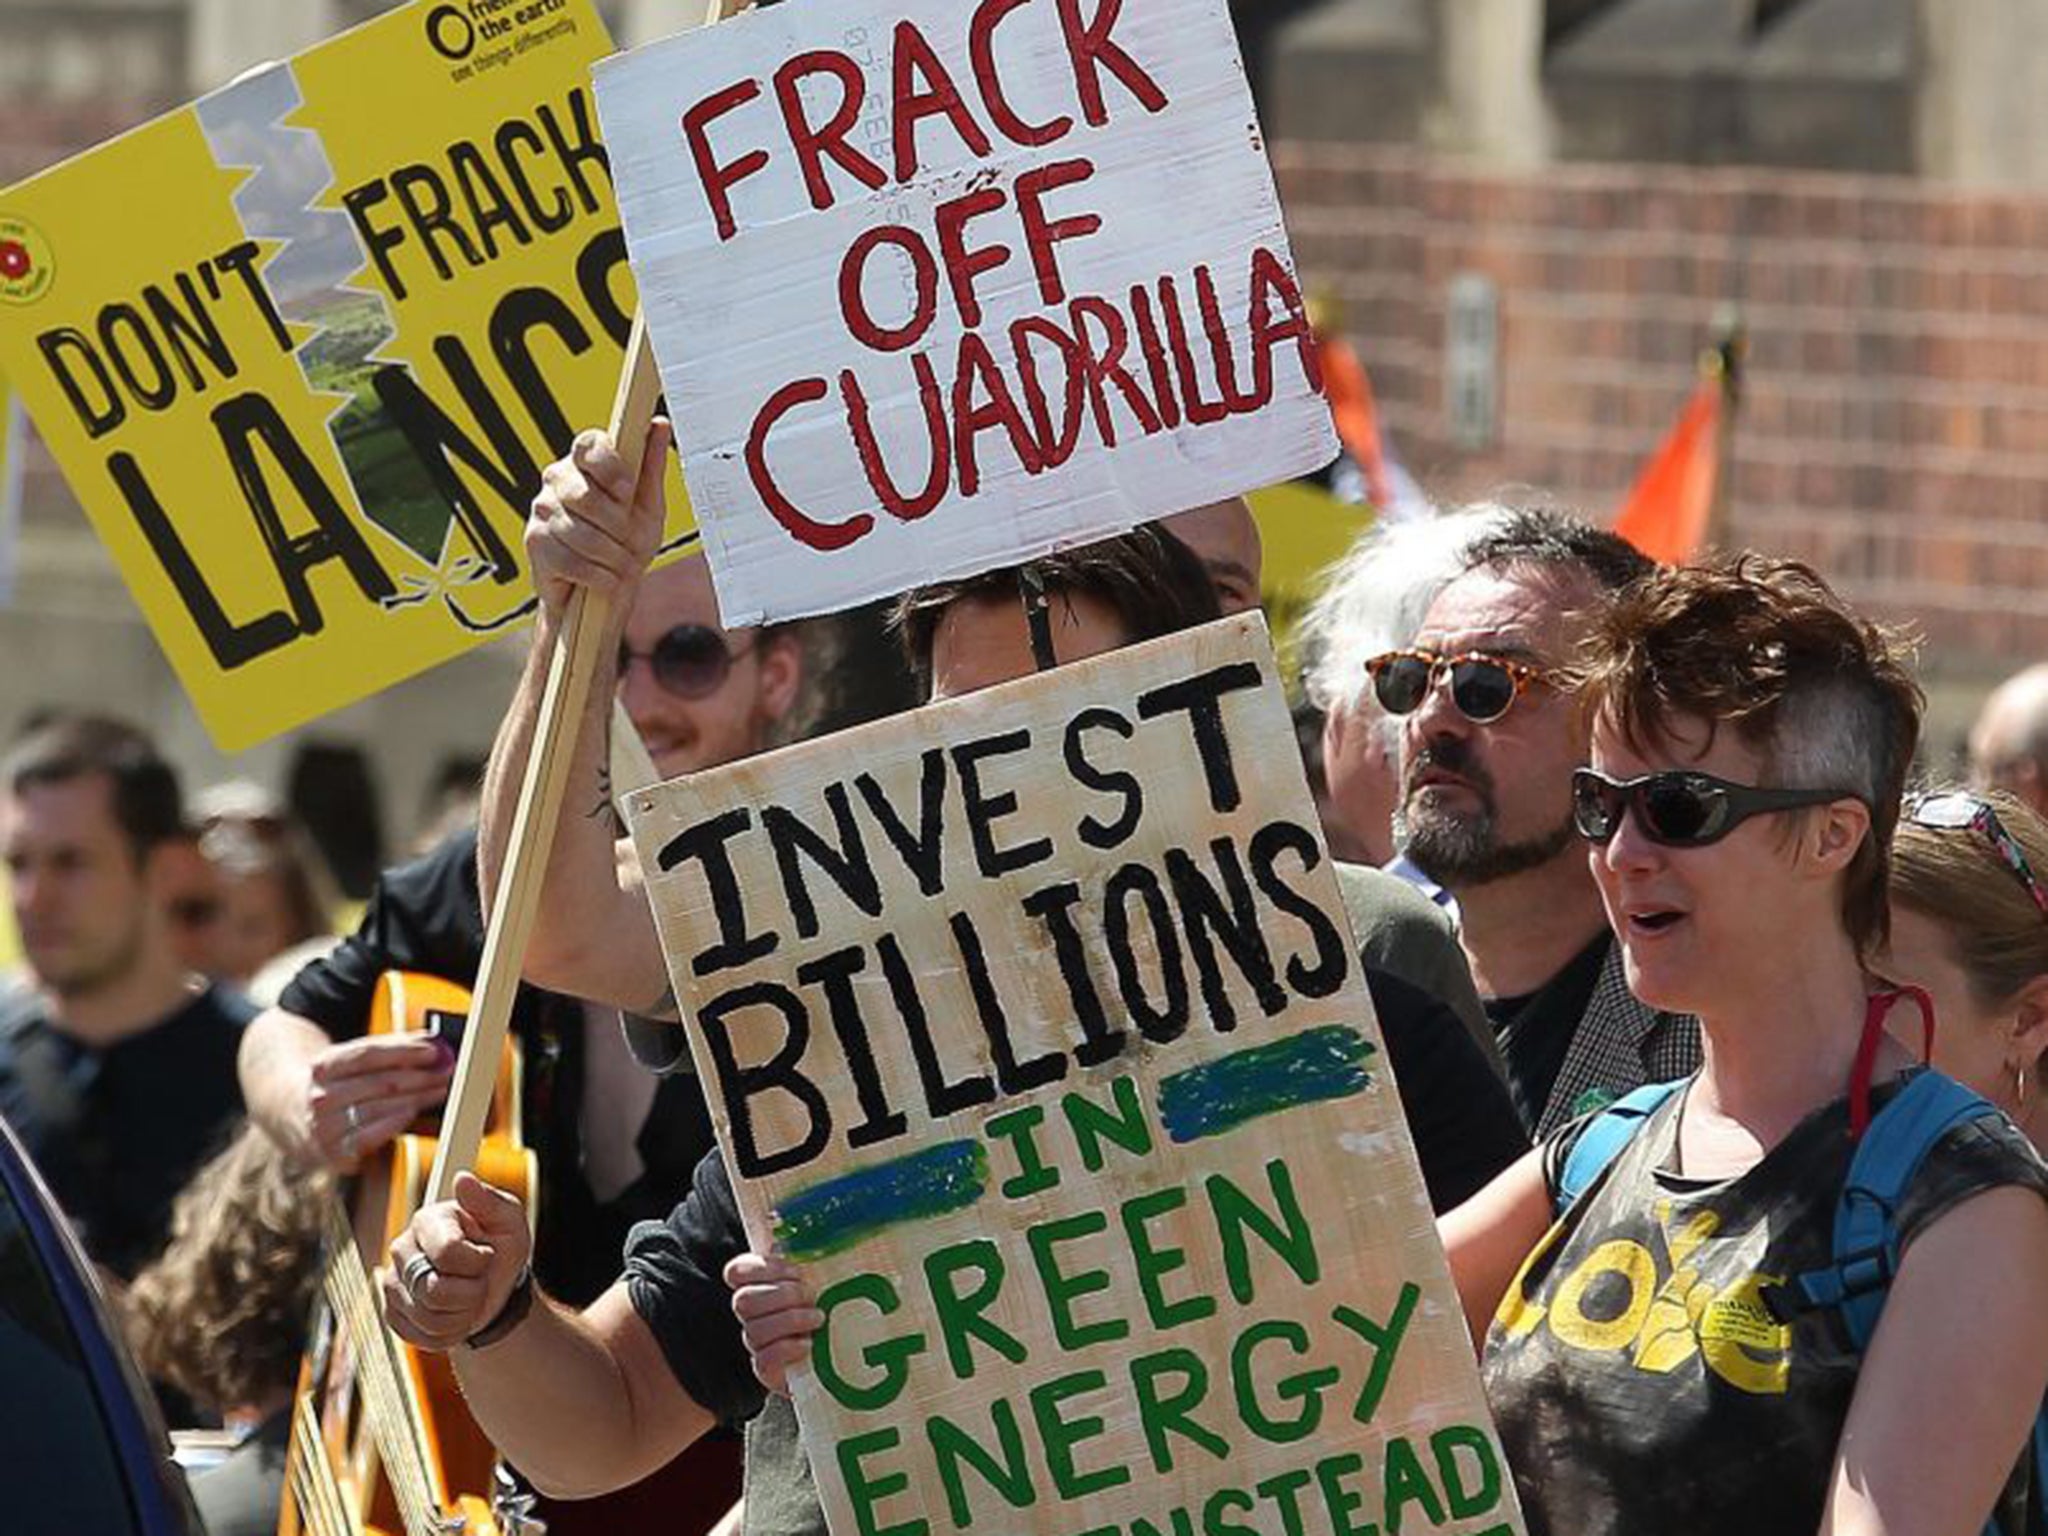 Cuadrilla’s plans in Lancashire provoked protests from climate change activists 